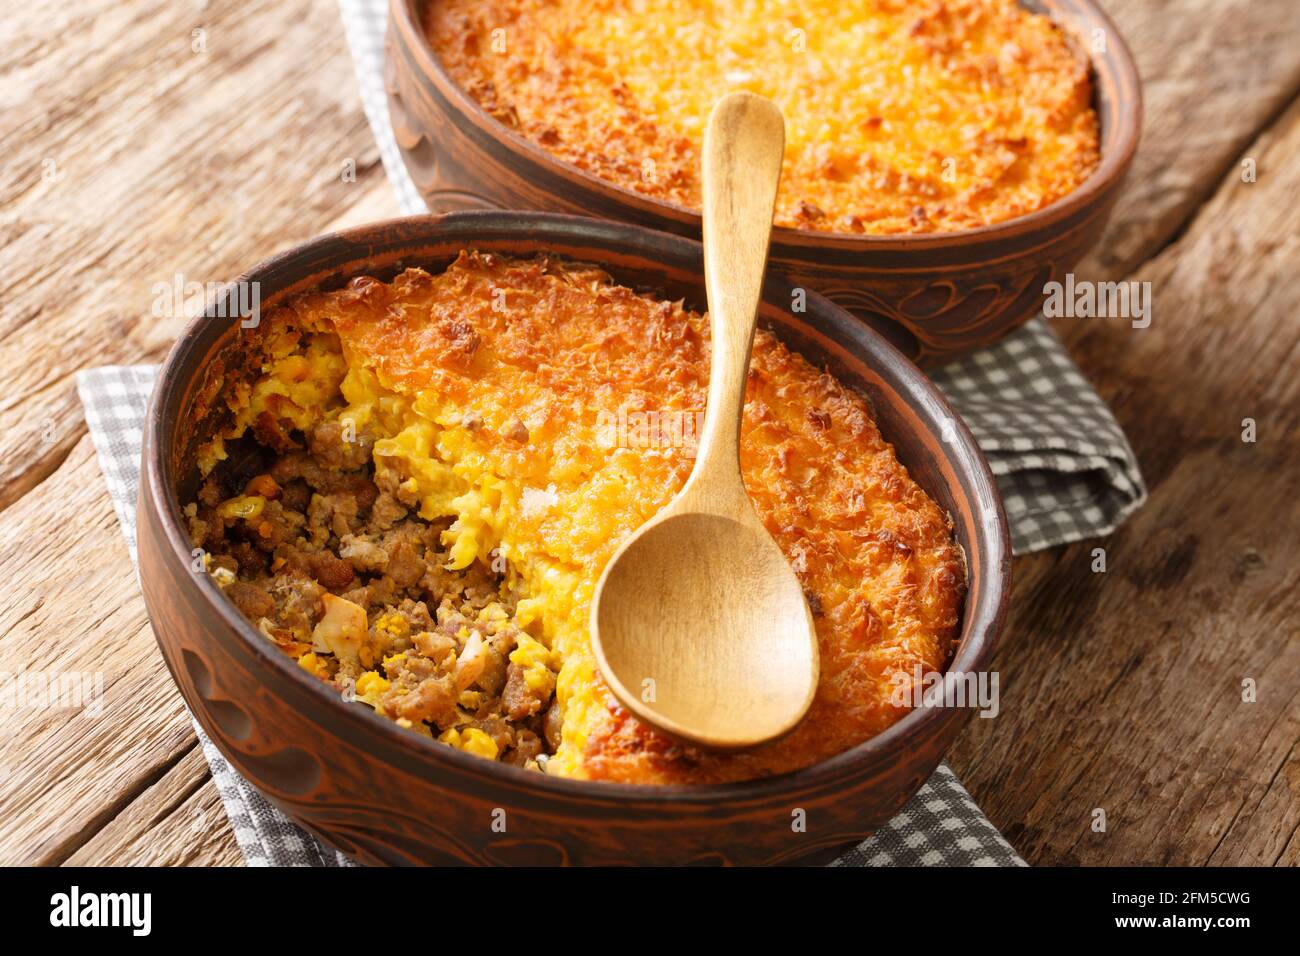 Pastel de choclo corn pie is a Chilean dish based on sweetcorn and beef closeup in the pots on the table. Horizontal Stock Photo